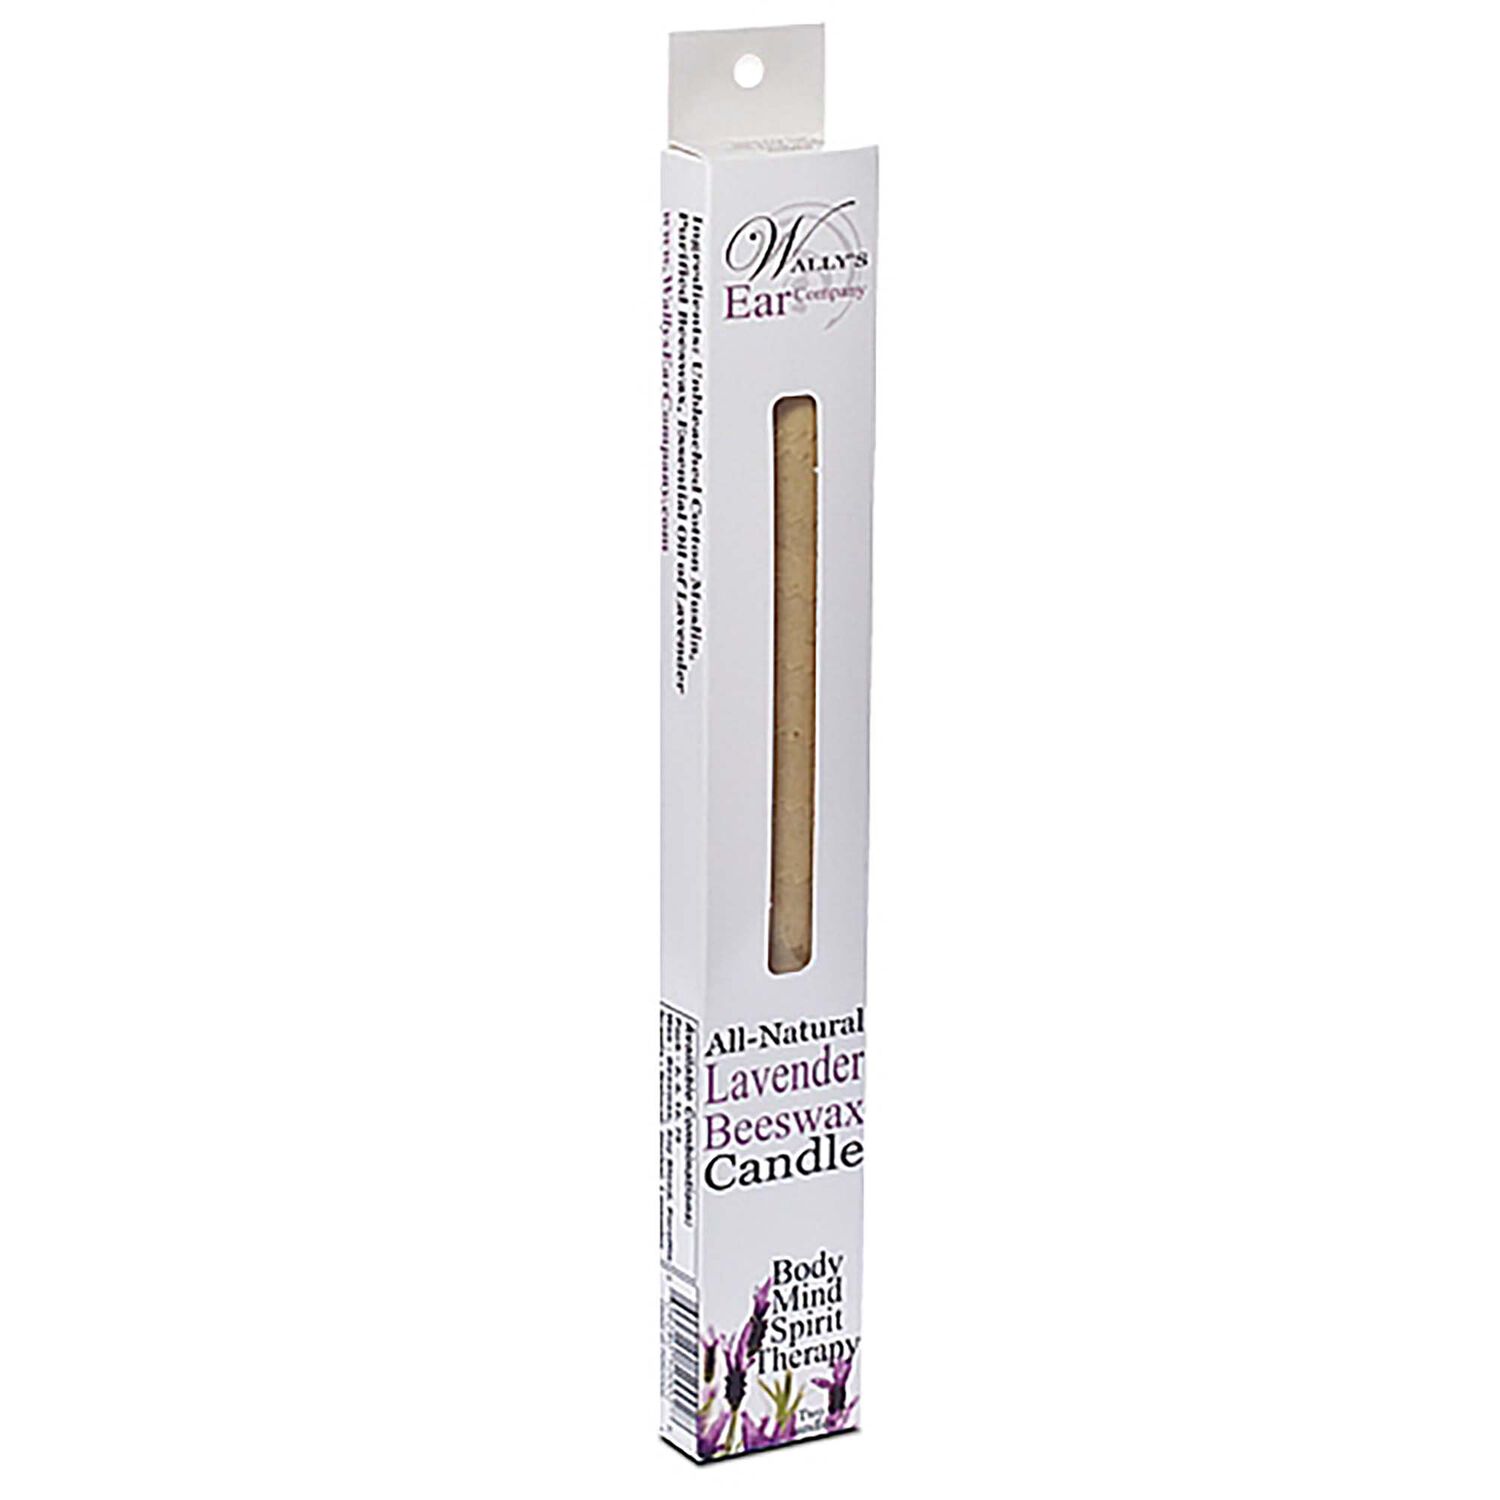 All Natural Lavender Beeswax Ear Candles - 2 Items  | GNC